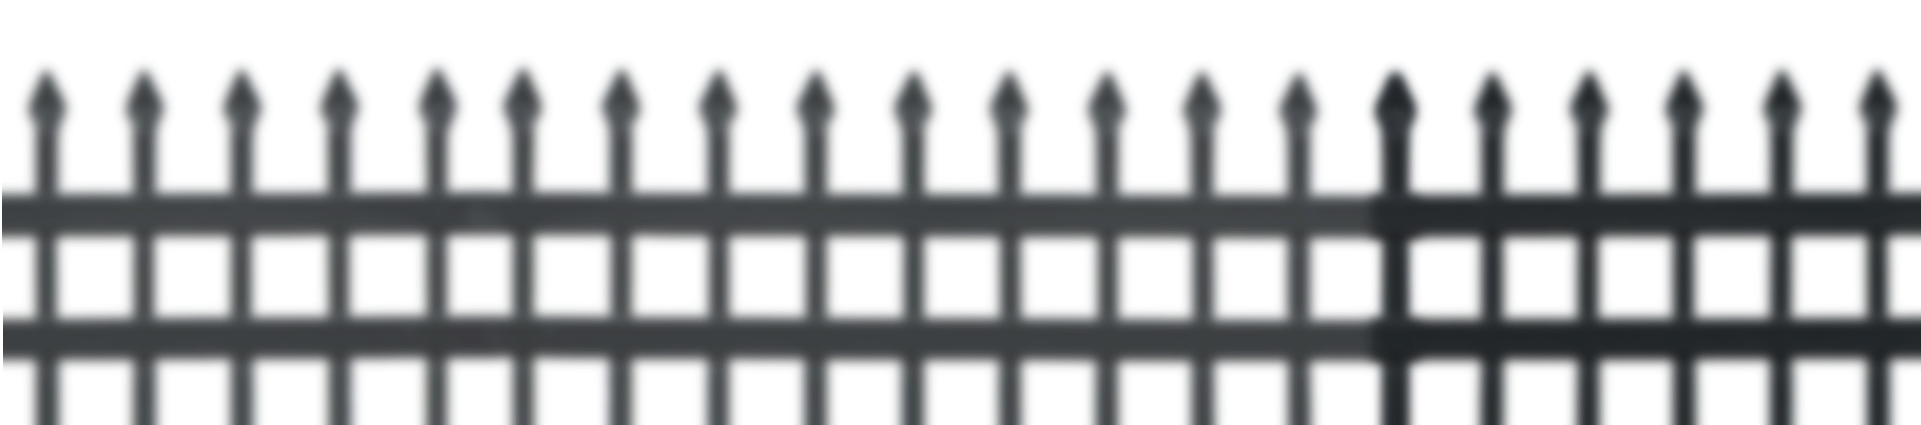 Blurry fence background